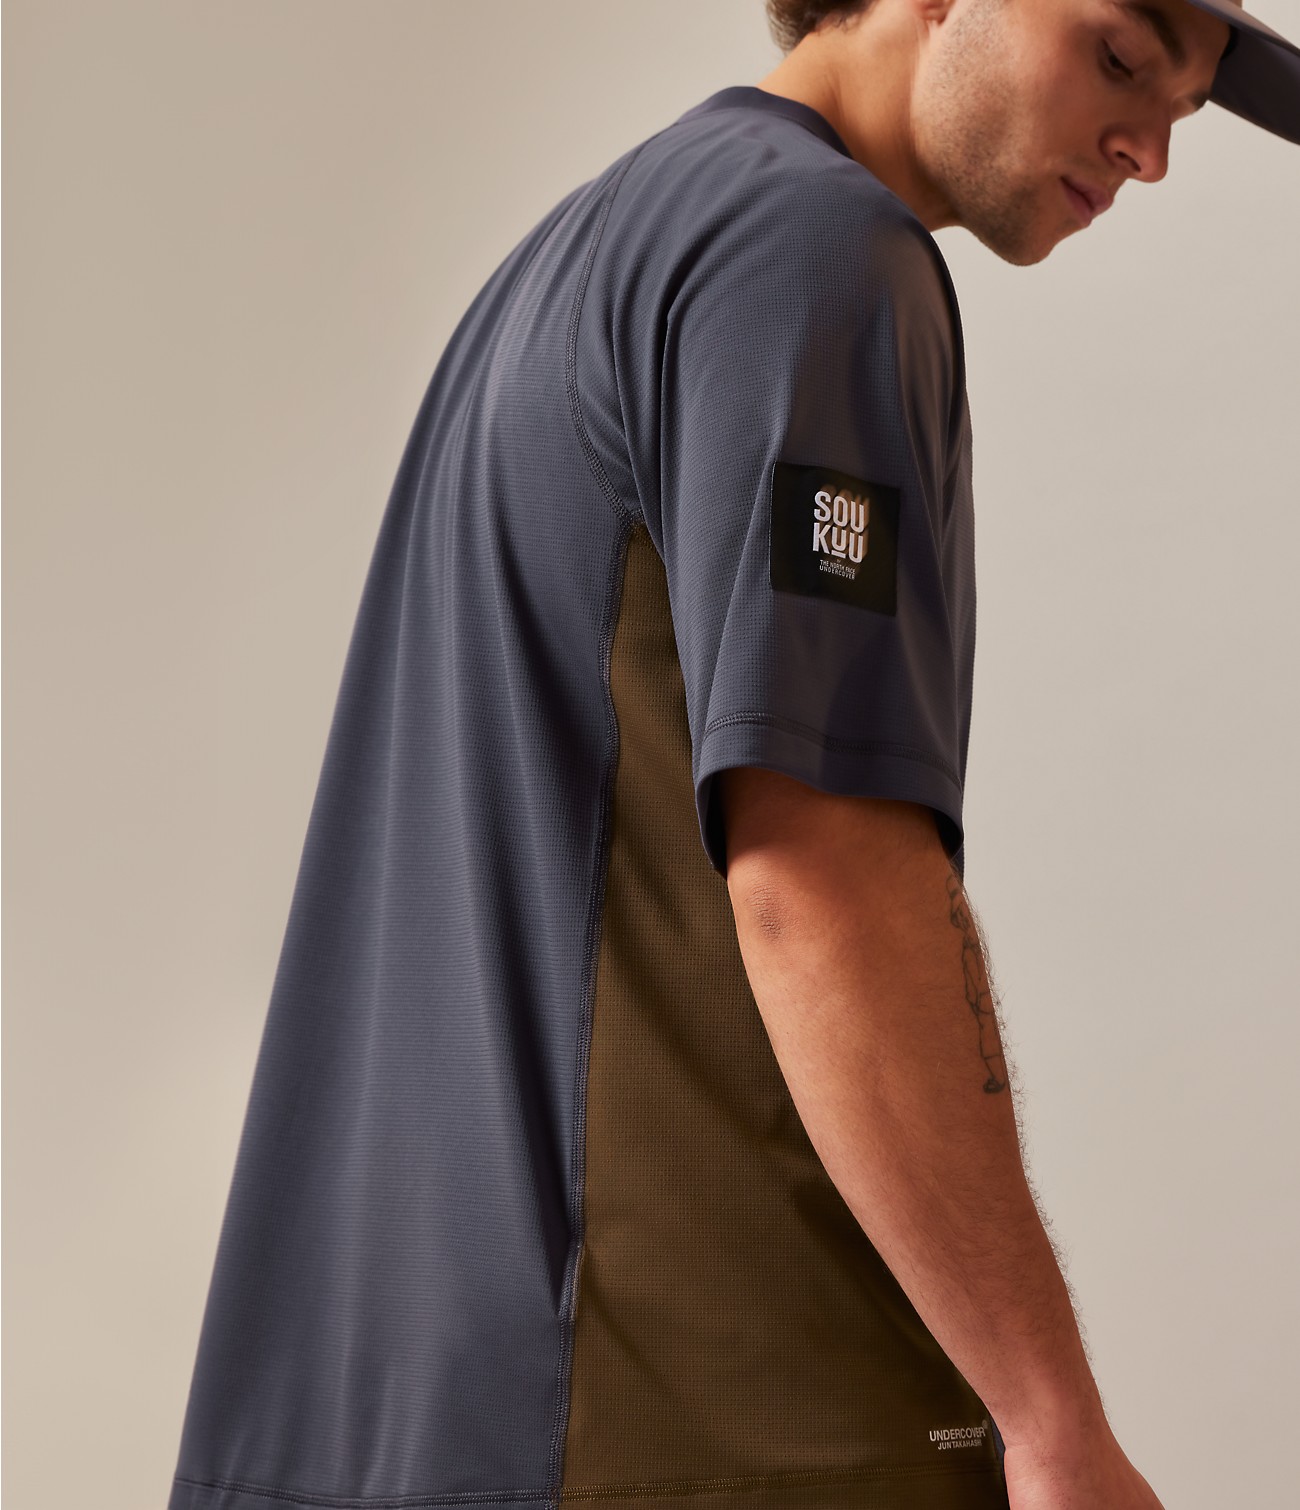 The North Face x UNDERCOVER SOUKUU Trail Run Short-Sleeve Tee |